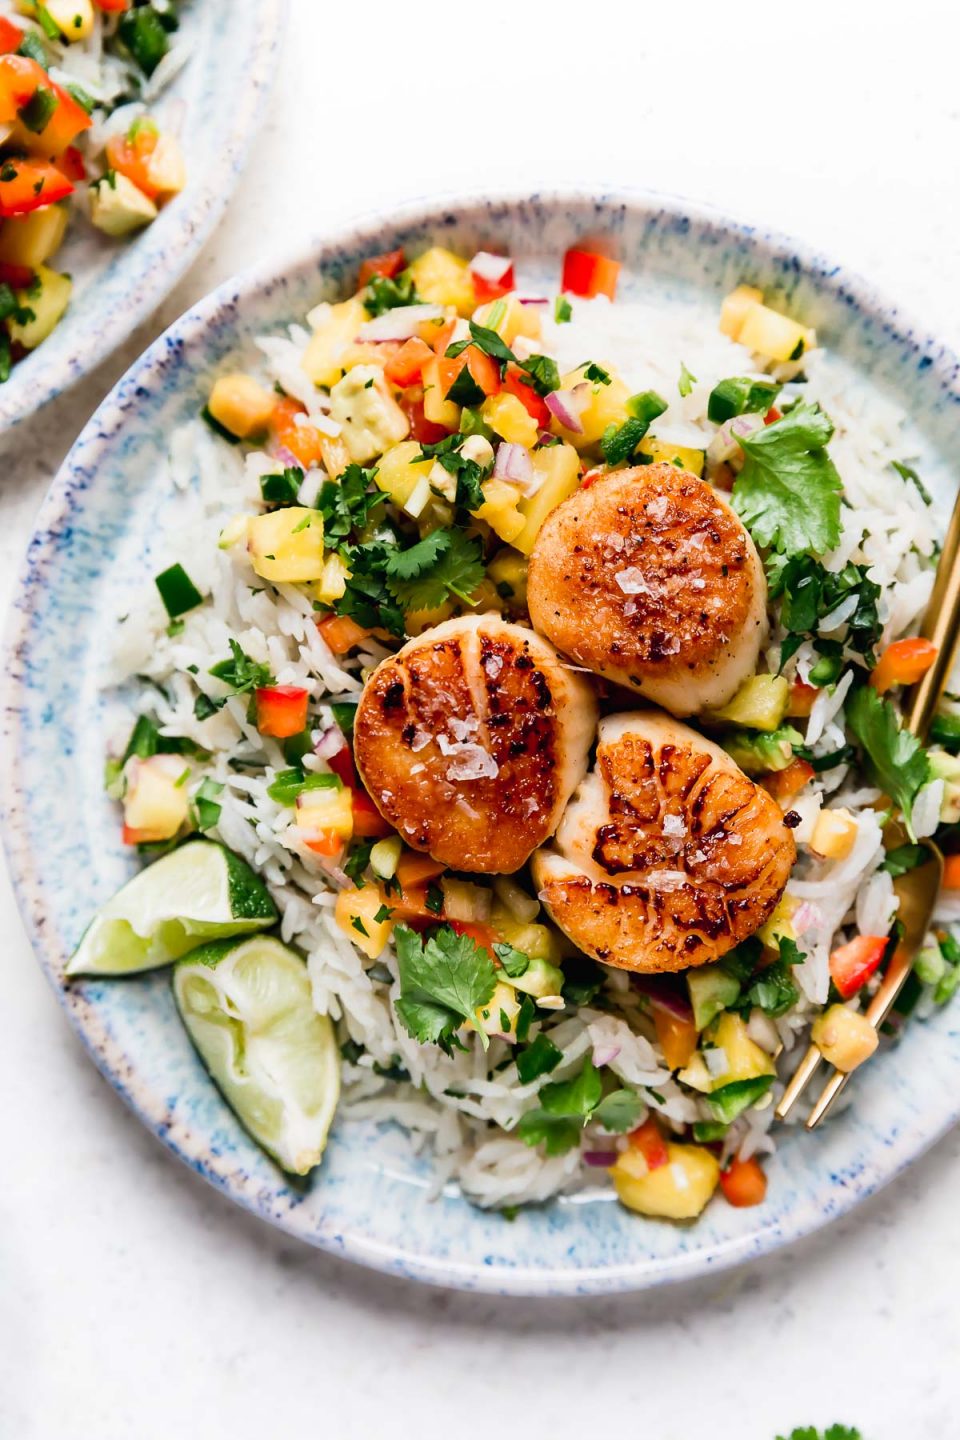 3 seared scallops served on a blue plate with coconut rice & mango salsa. The easiest healthy seared scallops recipe!